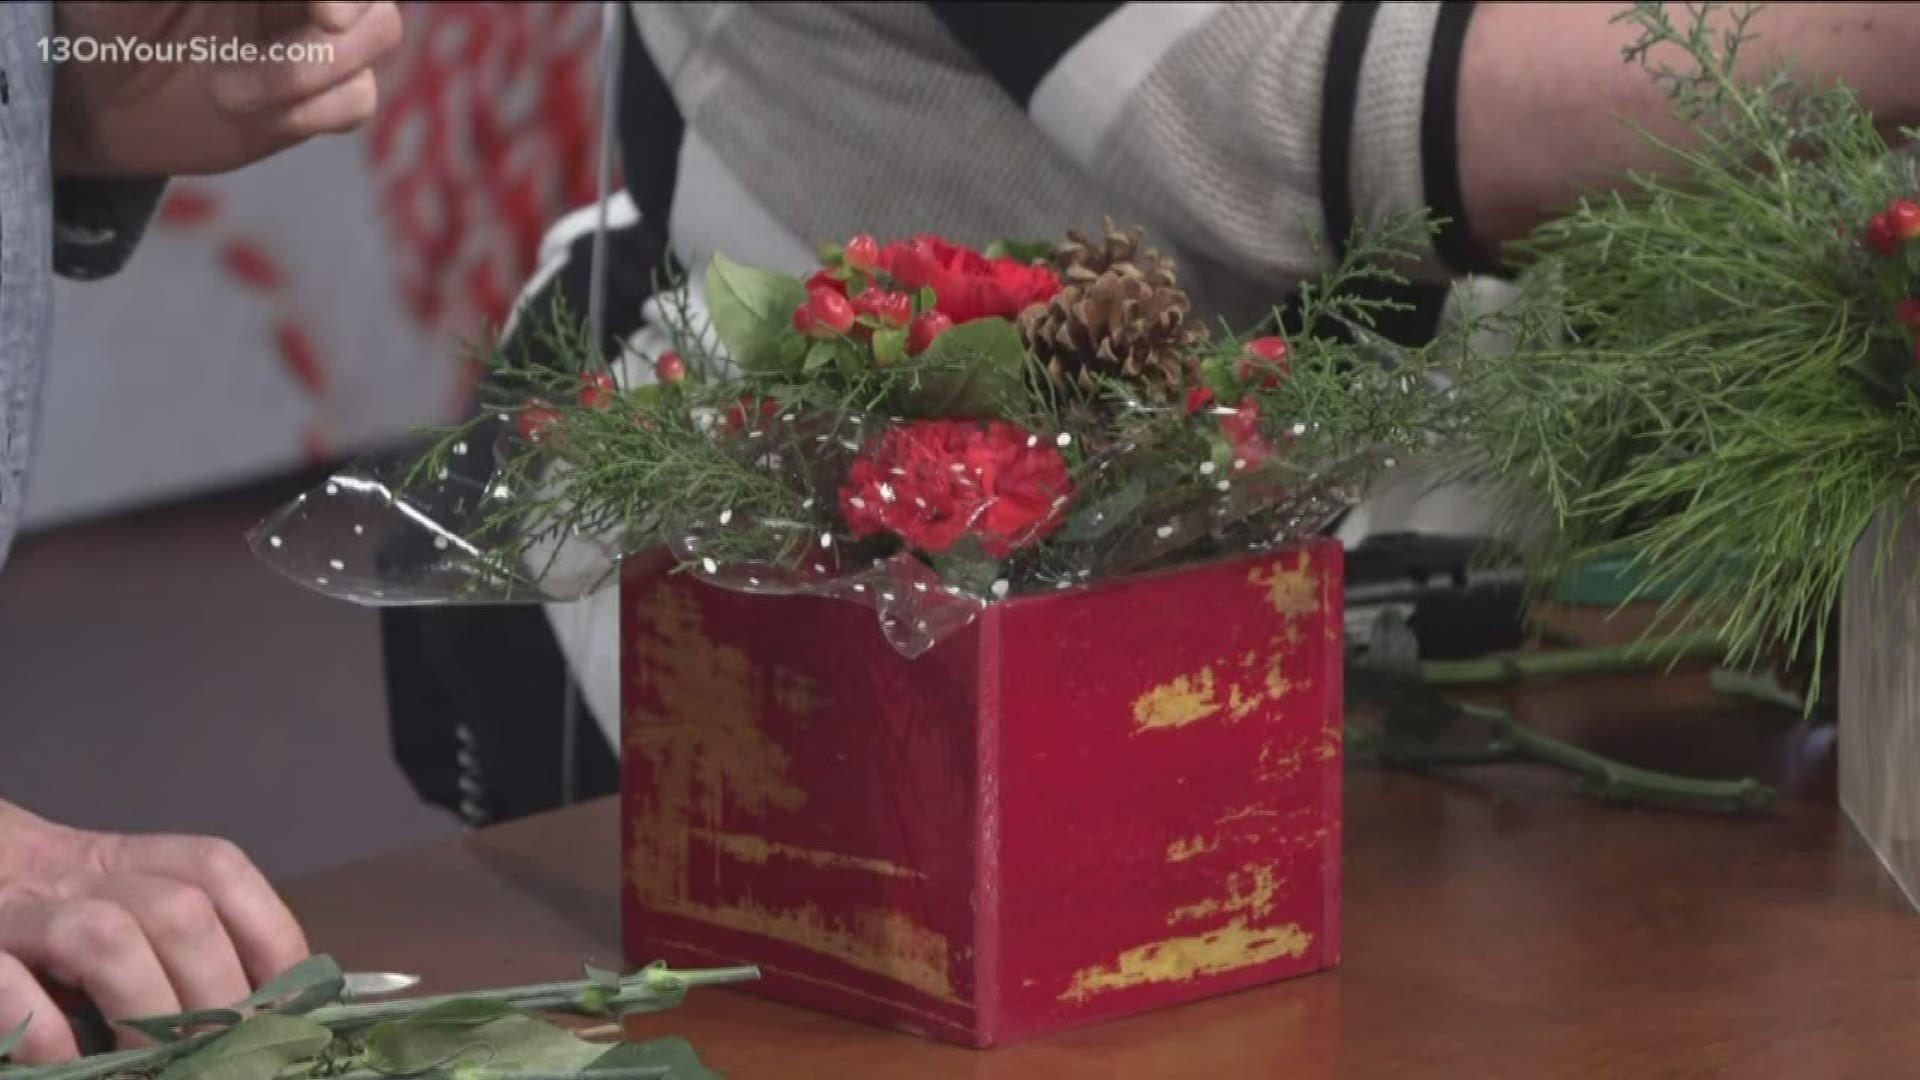 J. Schwanke shares how flowers can make the holidays even happier